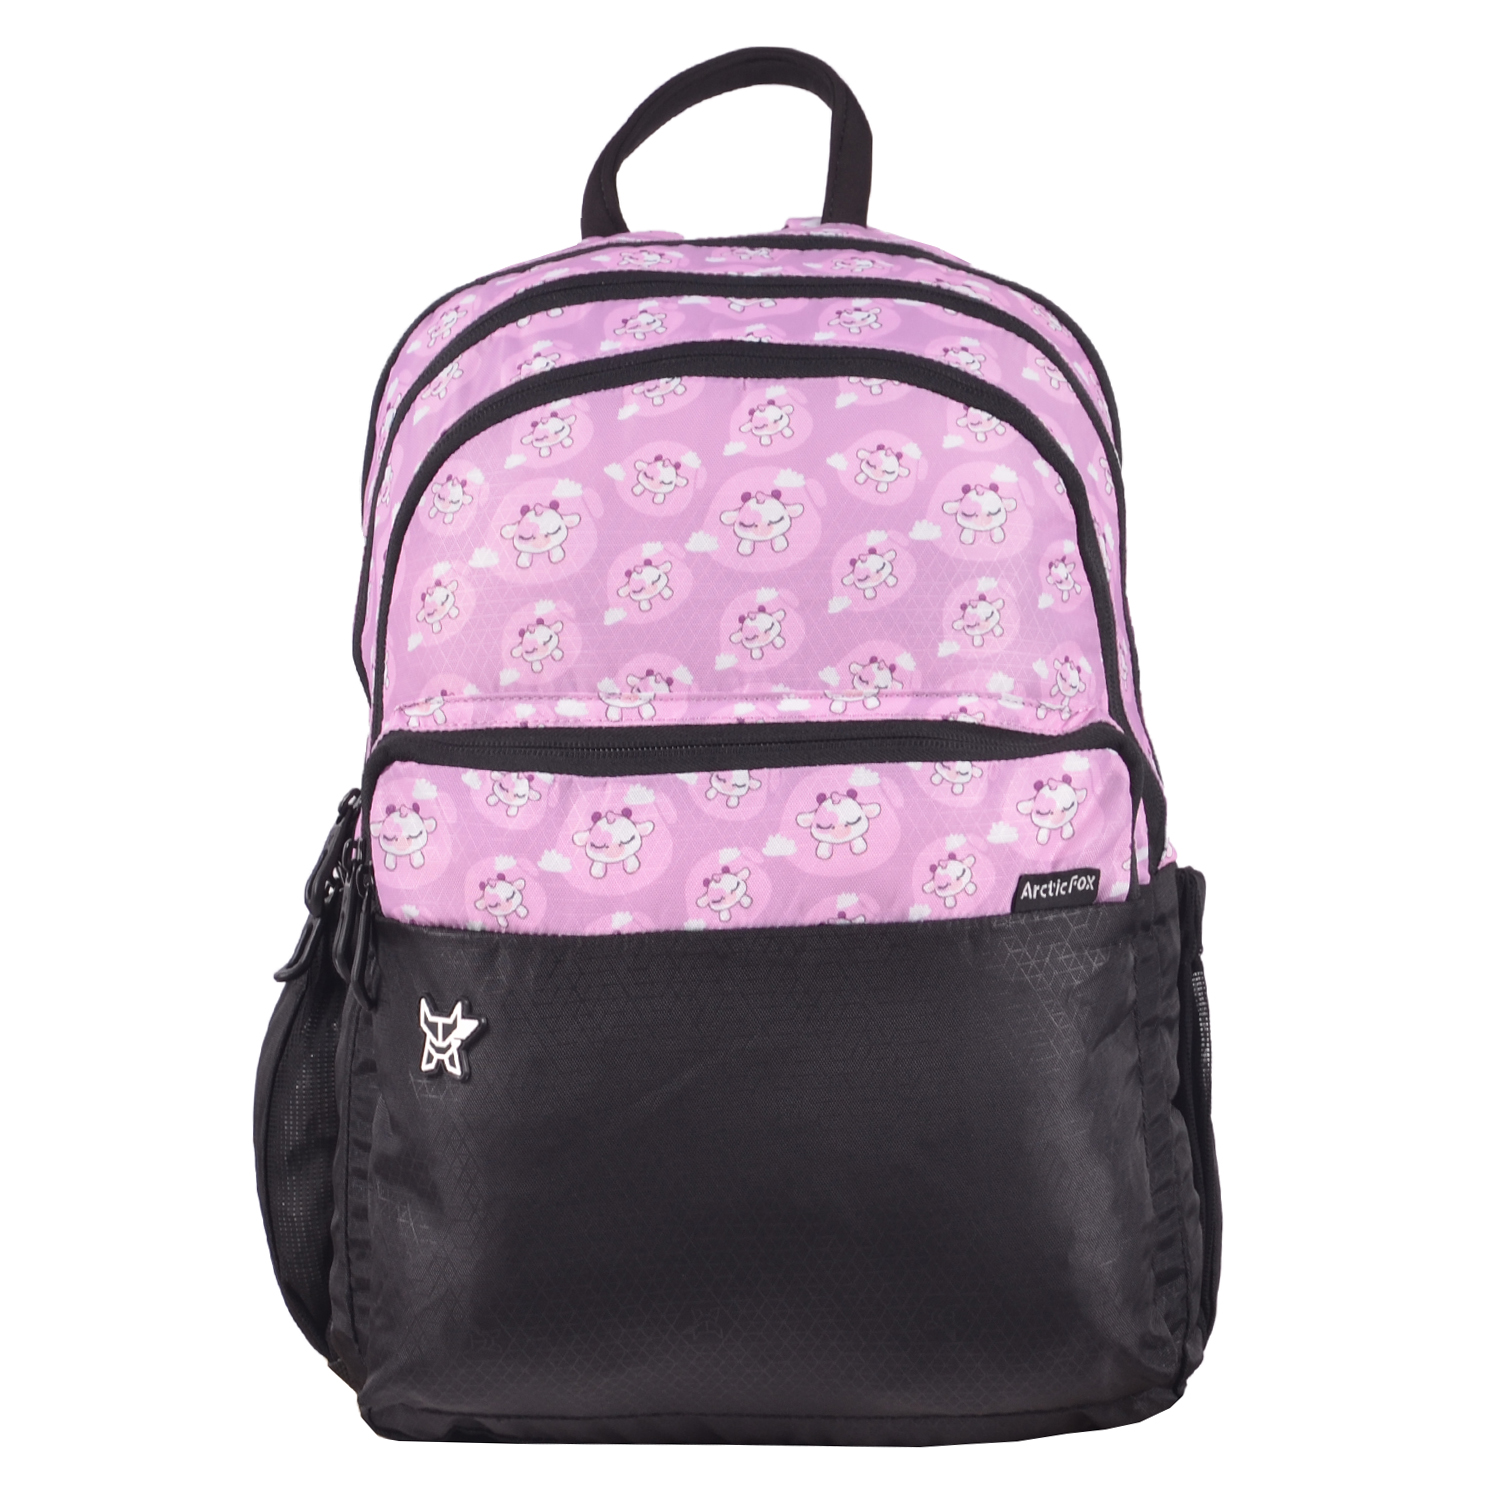 ARCTIC FOX BACKPACK 21L SILLY CALF PINK